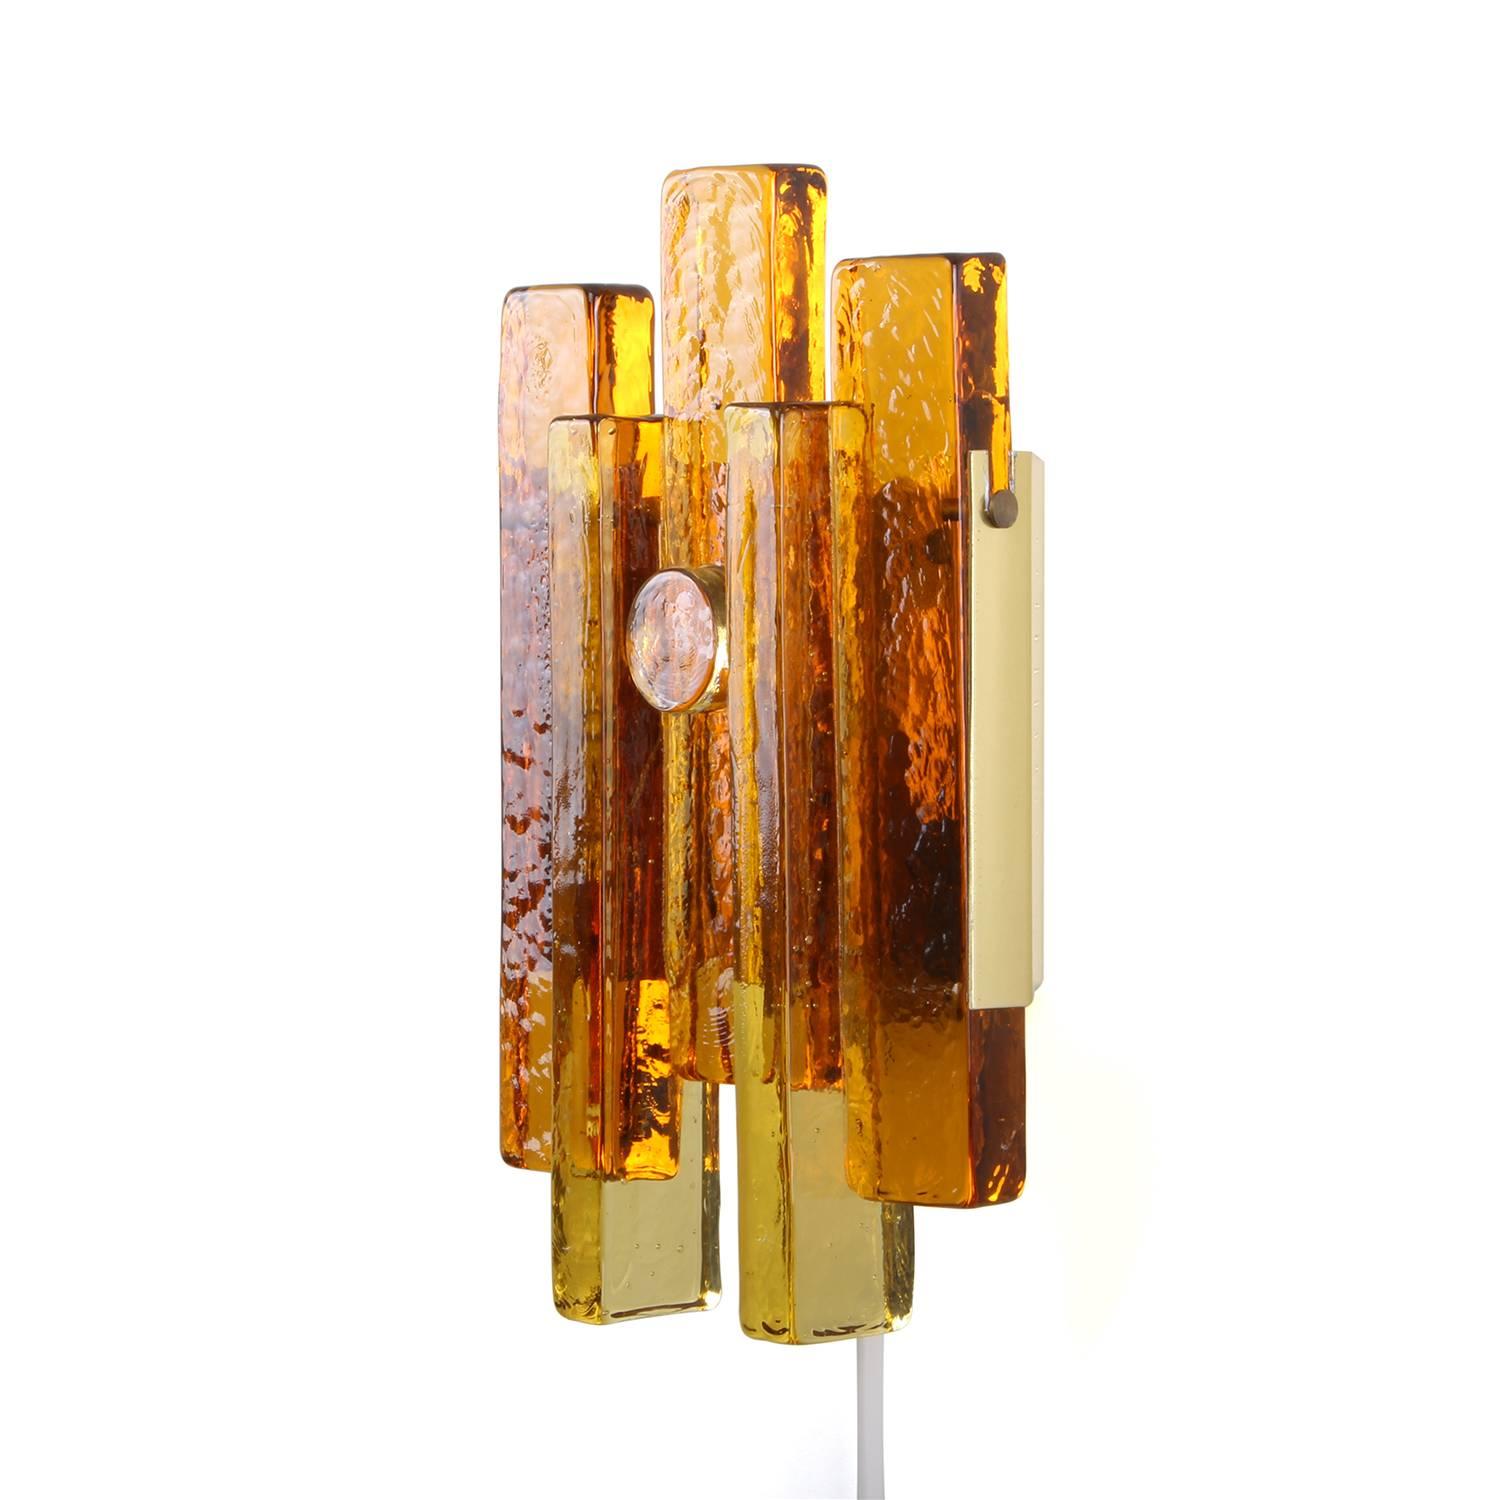 Lacquered Glass Wall Light by Hassel & Teudt 1960s, Rustic Amber Glass and Brass Wall Lamp